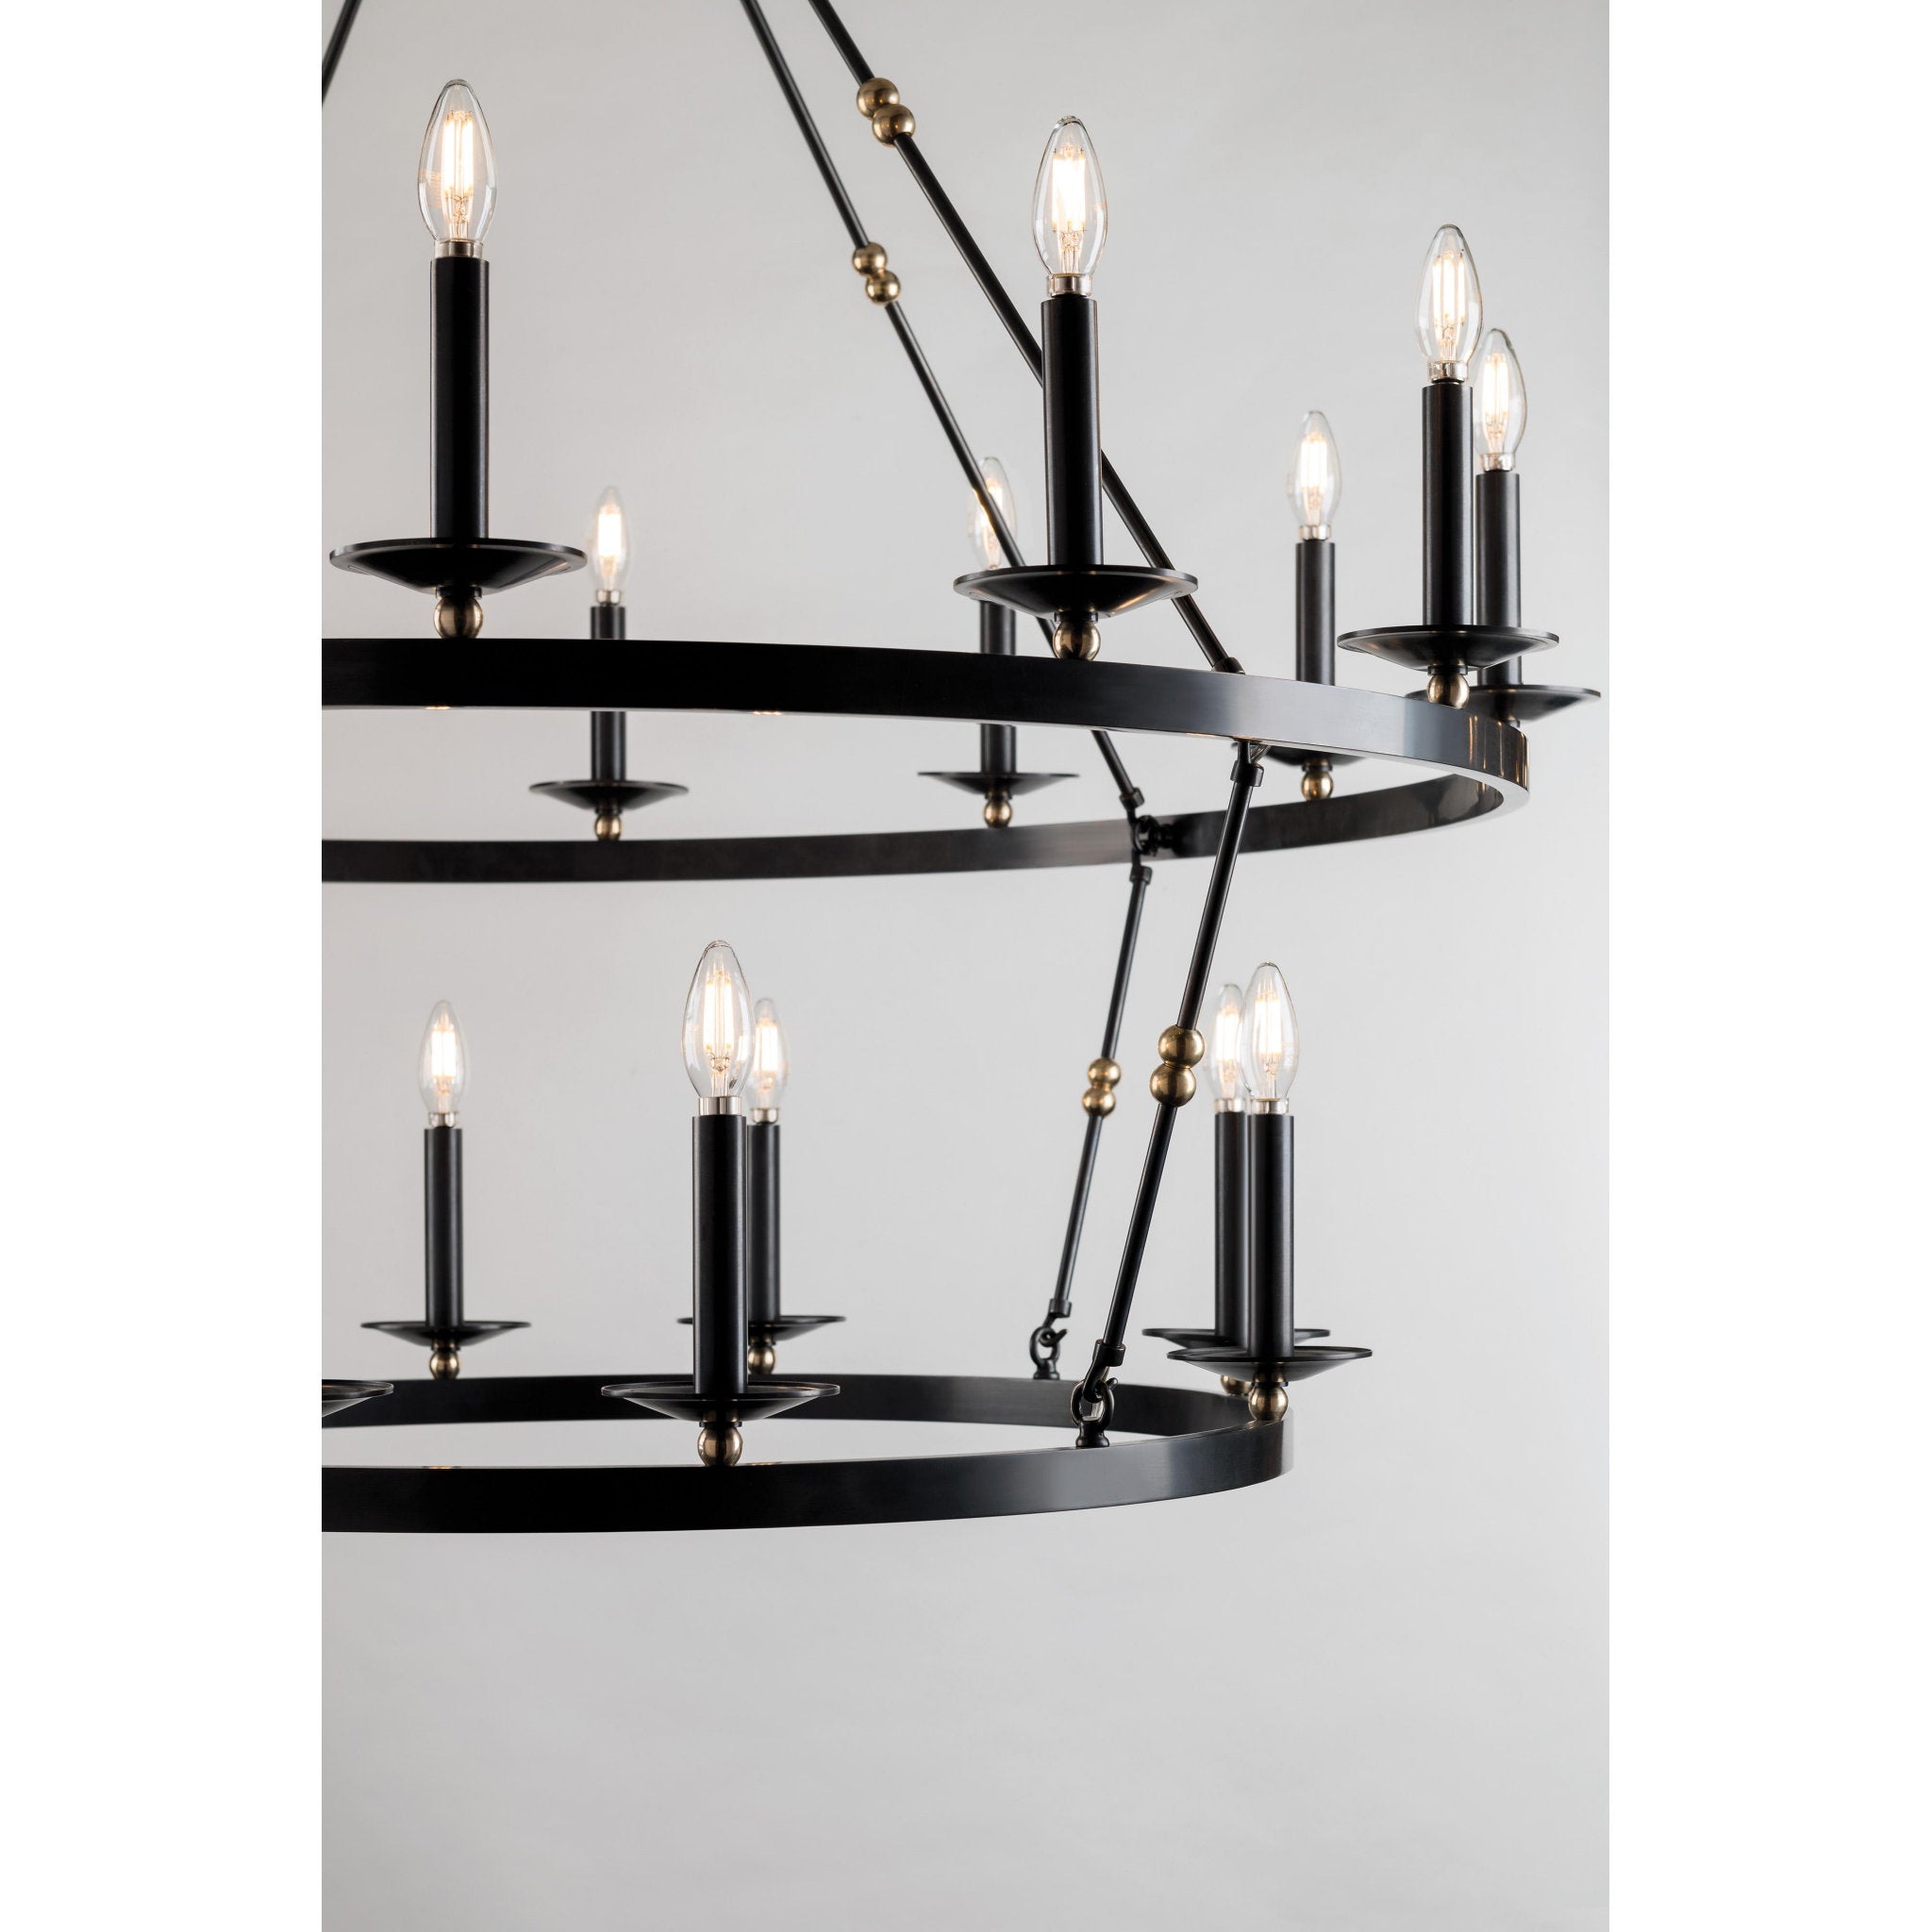 Allendale 10 Light Linear in Aged Old Bronze